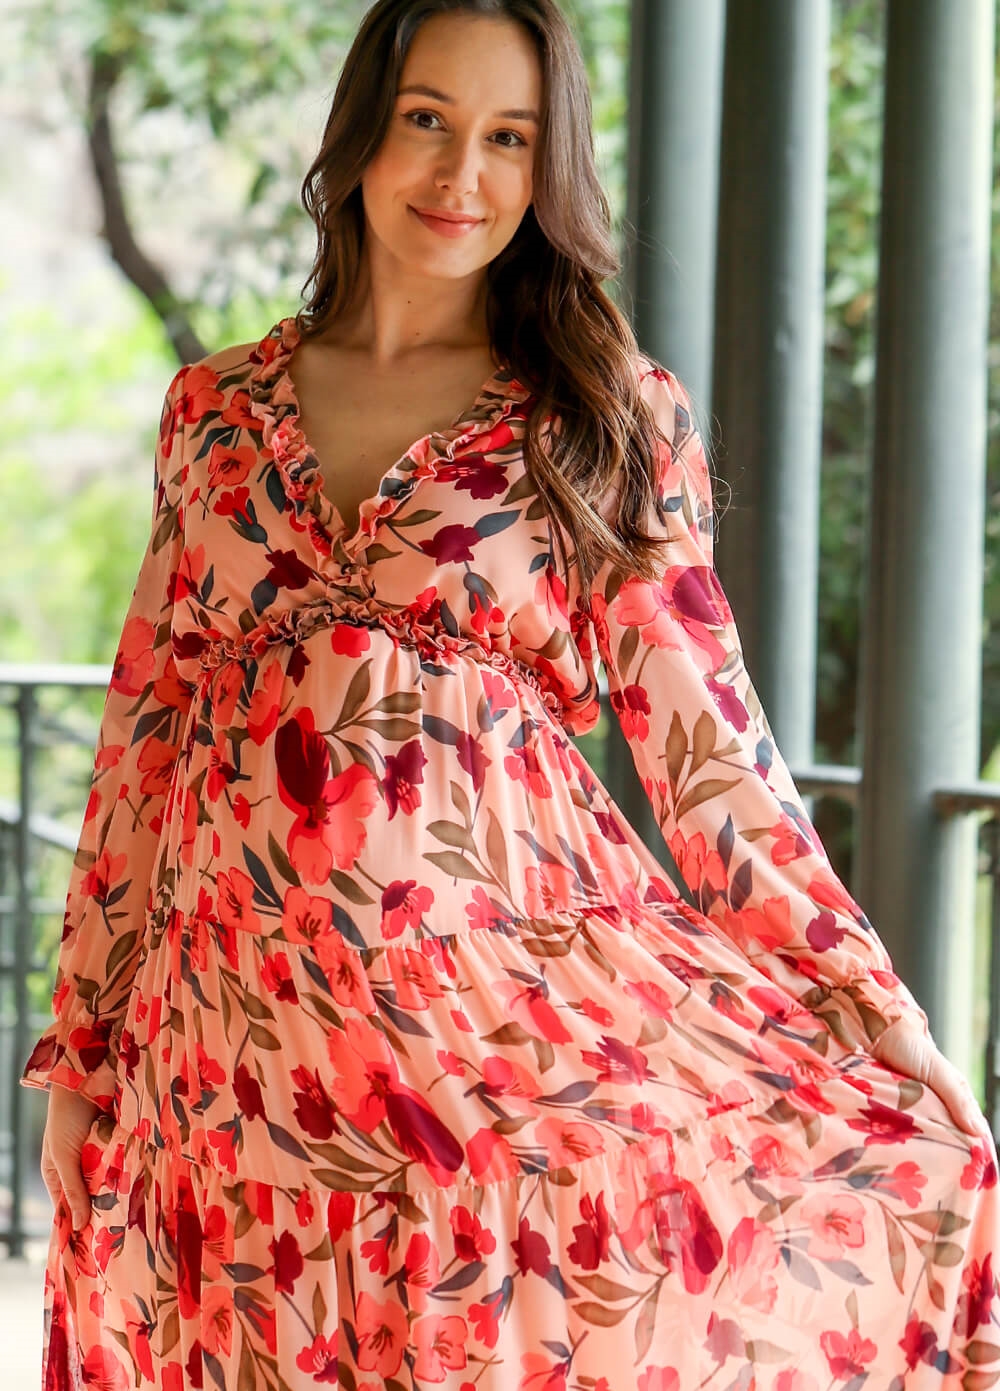 Lait & Co - Wanderlust Pink Floral Tiered Maternity Maxi Gown